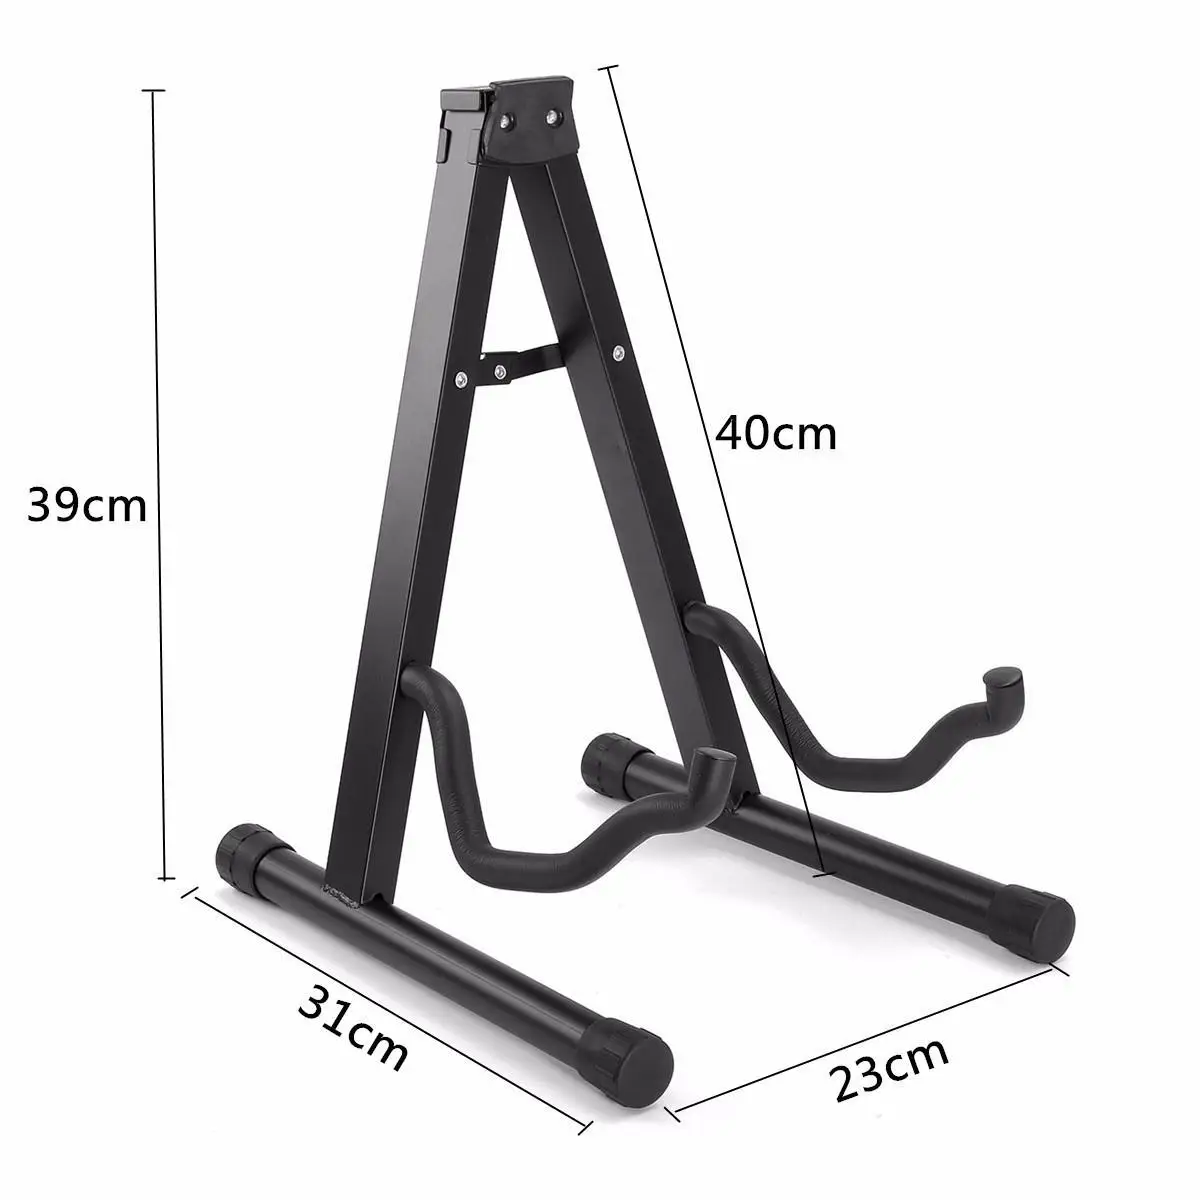 Portable Universal Guitar Stand Black Folding Tripod Stand Acoustic Classical Electric Guitar Stand Bass Holder Multifunctional enlarge